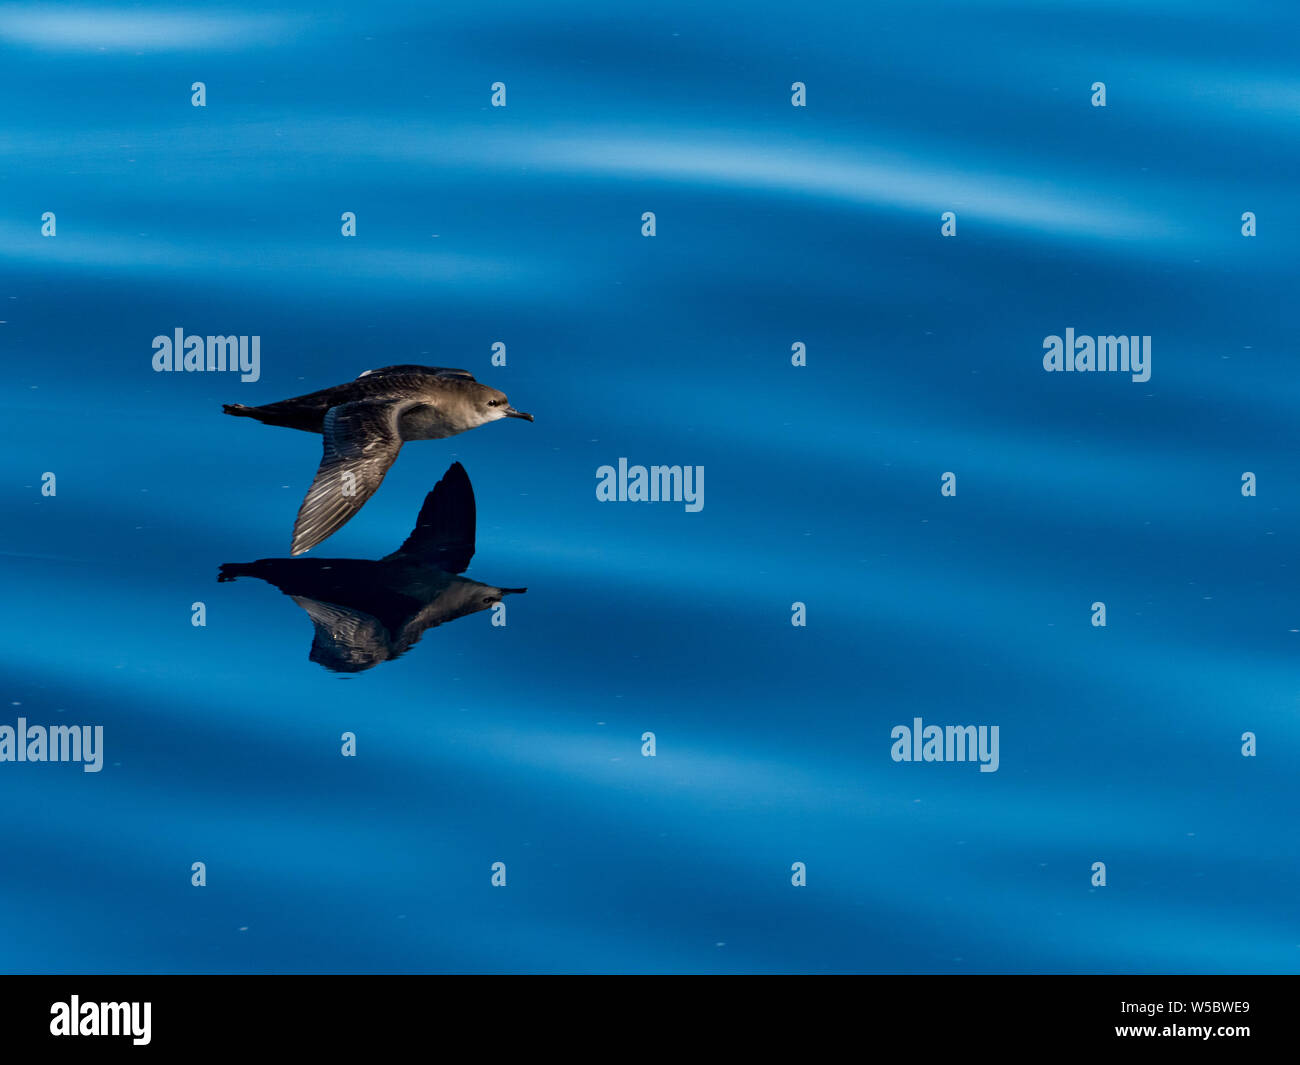 Short-tailed shearwater, Ardenna tenuirostris, in glassy water off the Chukotka coast of Russia in the Bering Sea Stock Photo